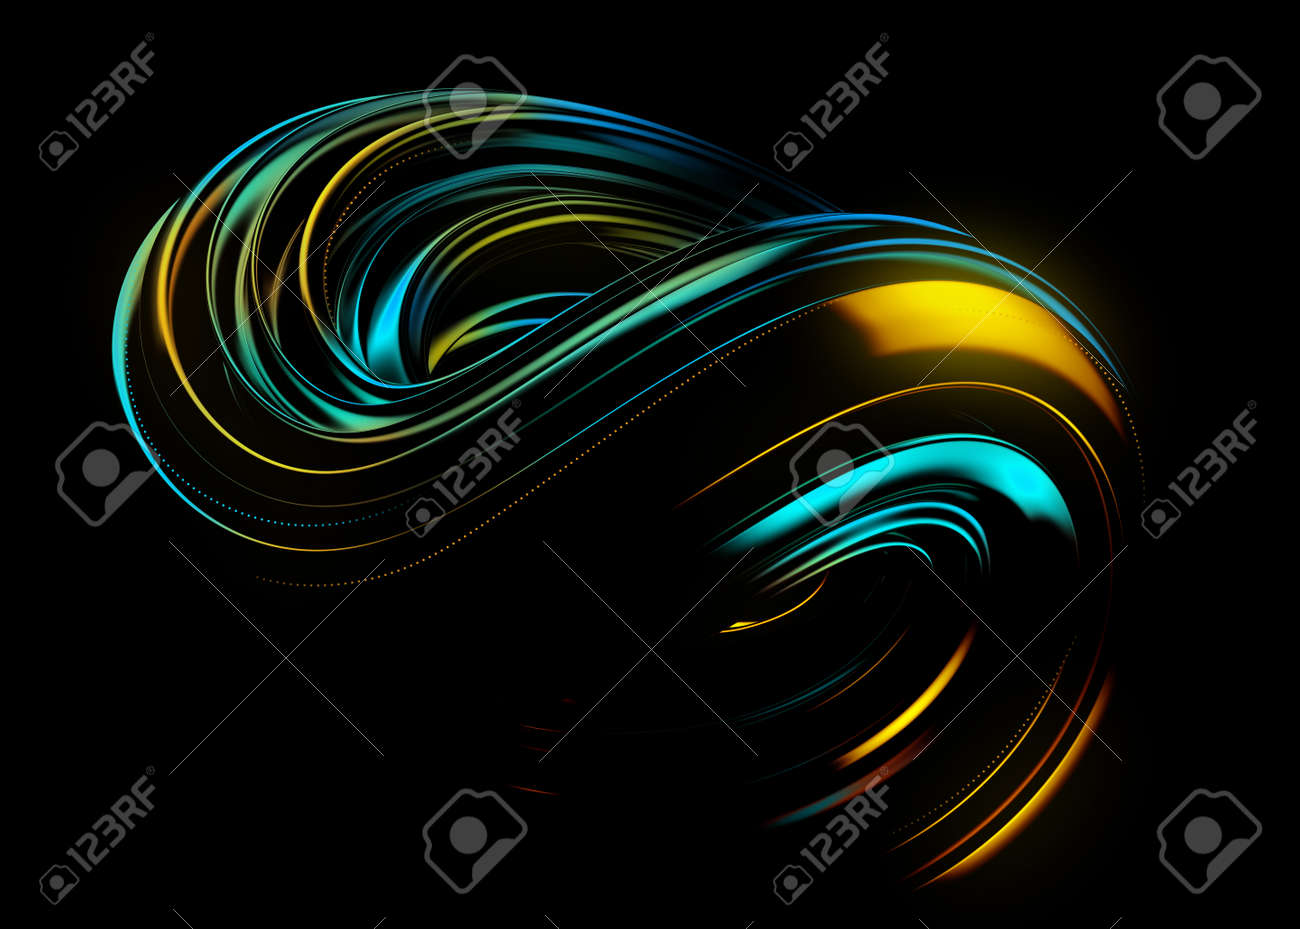 Abstract Trendy Wallpaper Futuristic 3d Object With Dynamic Waves